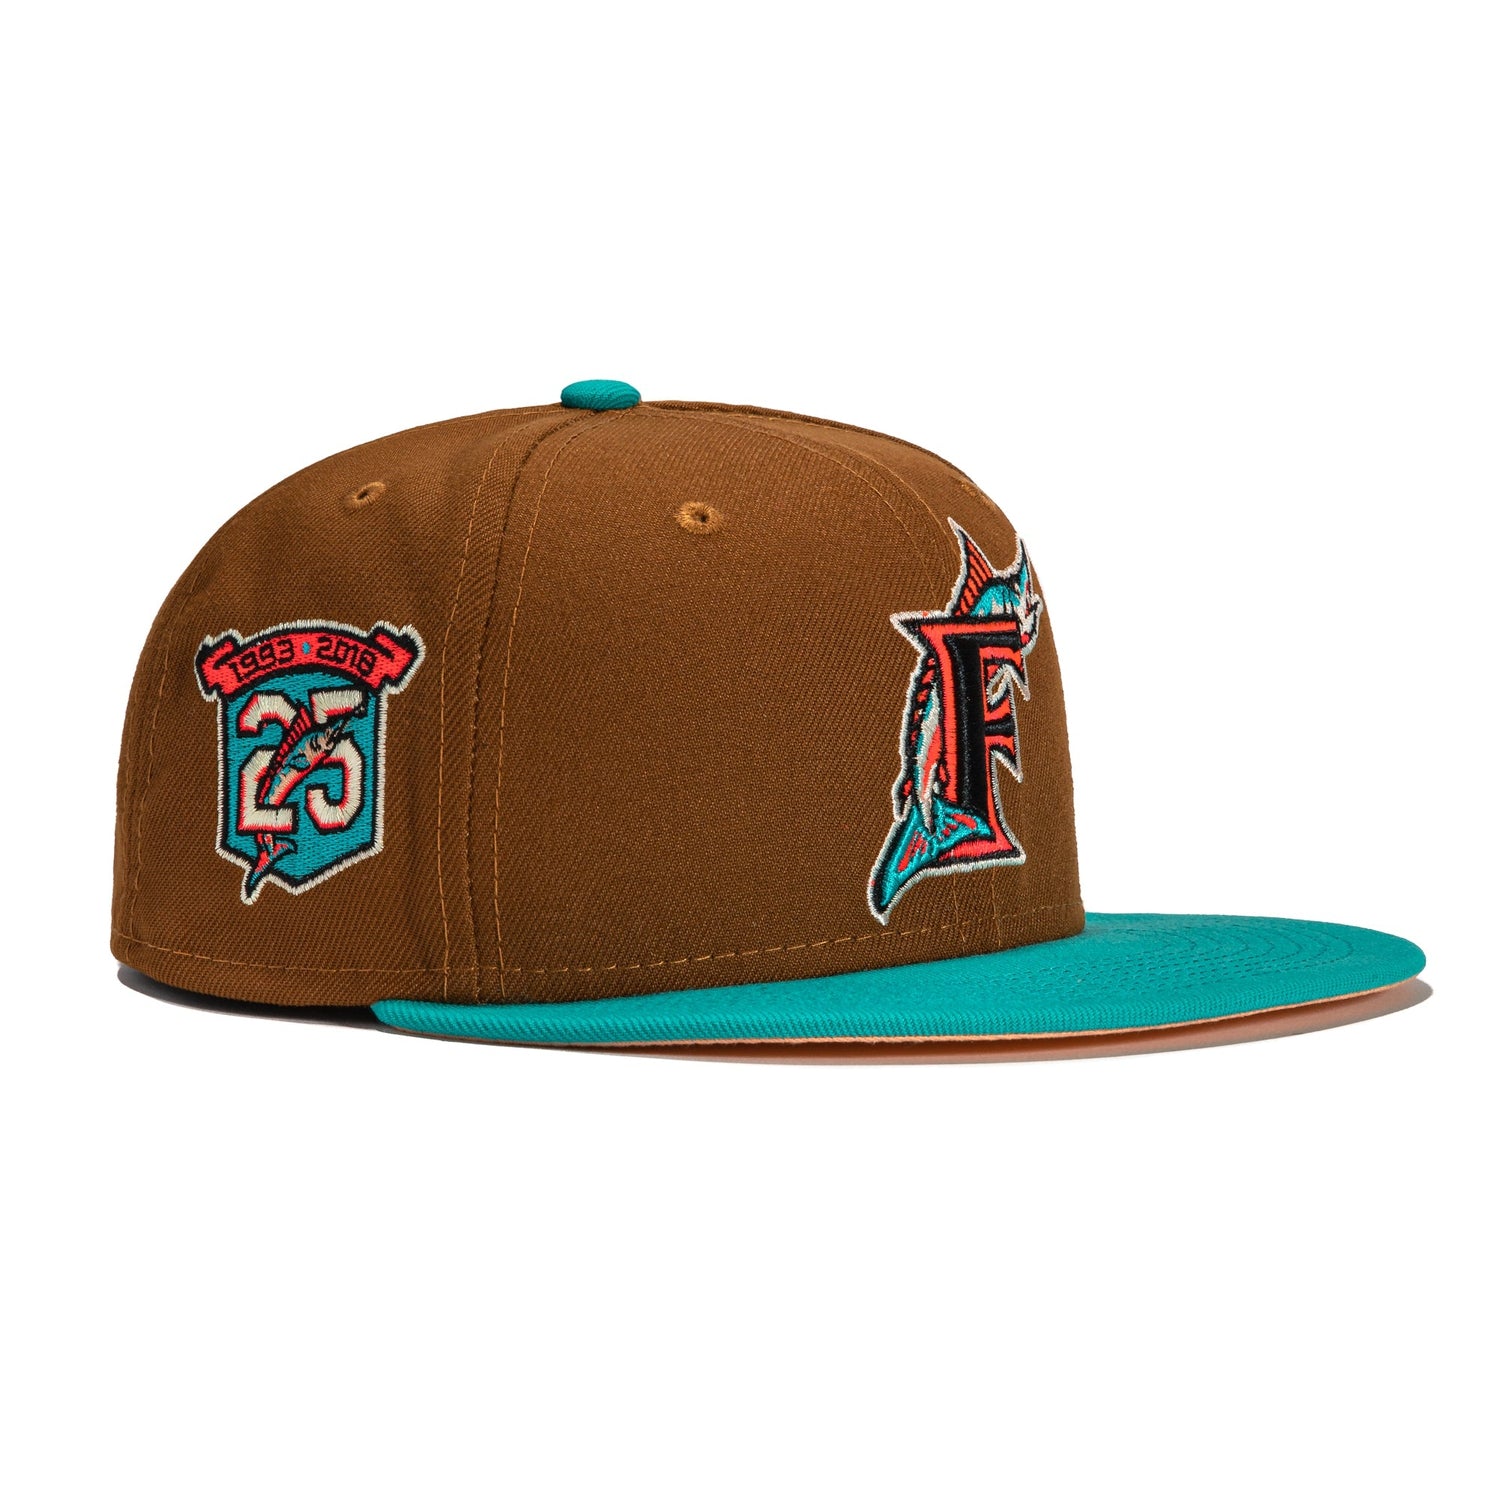 New Era 59Fifty Miami Marlins 25th Anniversary Patch Hat - Brown, Teal – Hat  Club